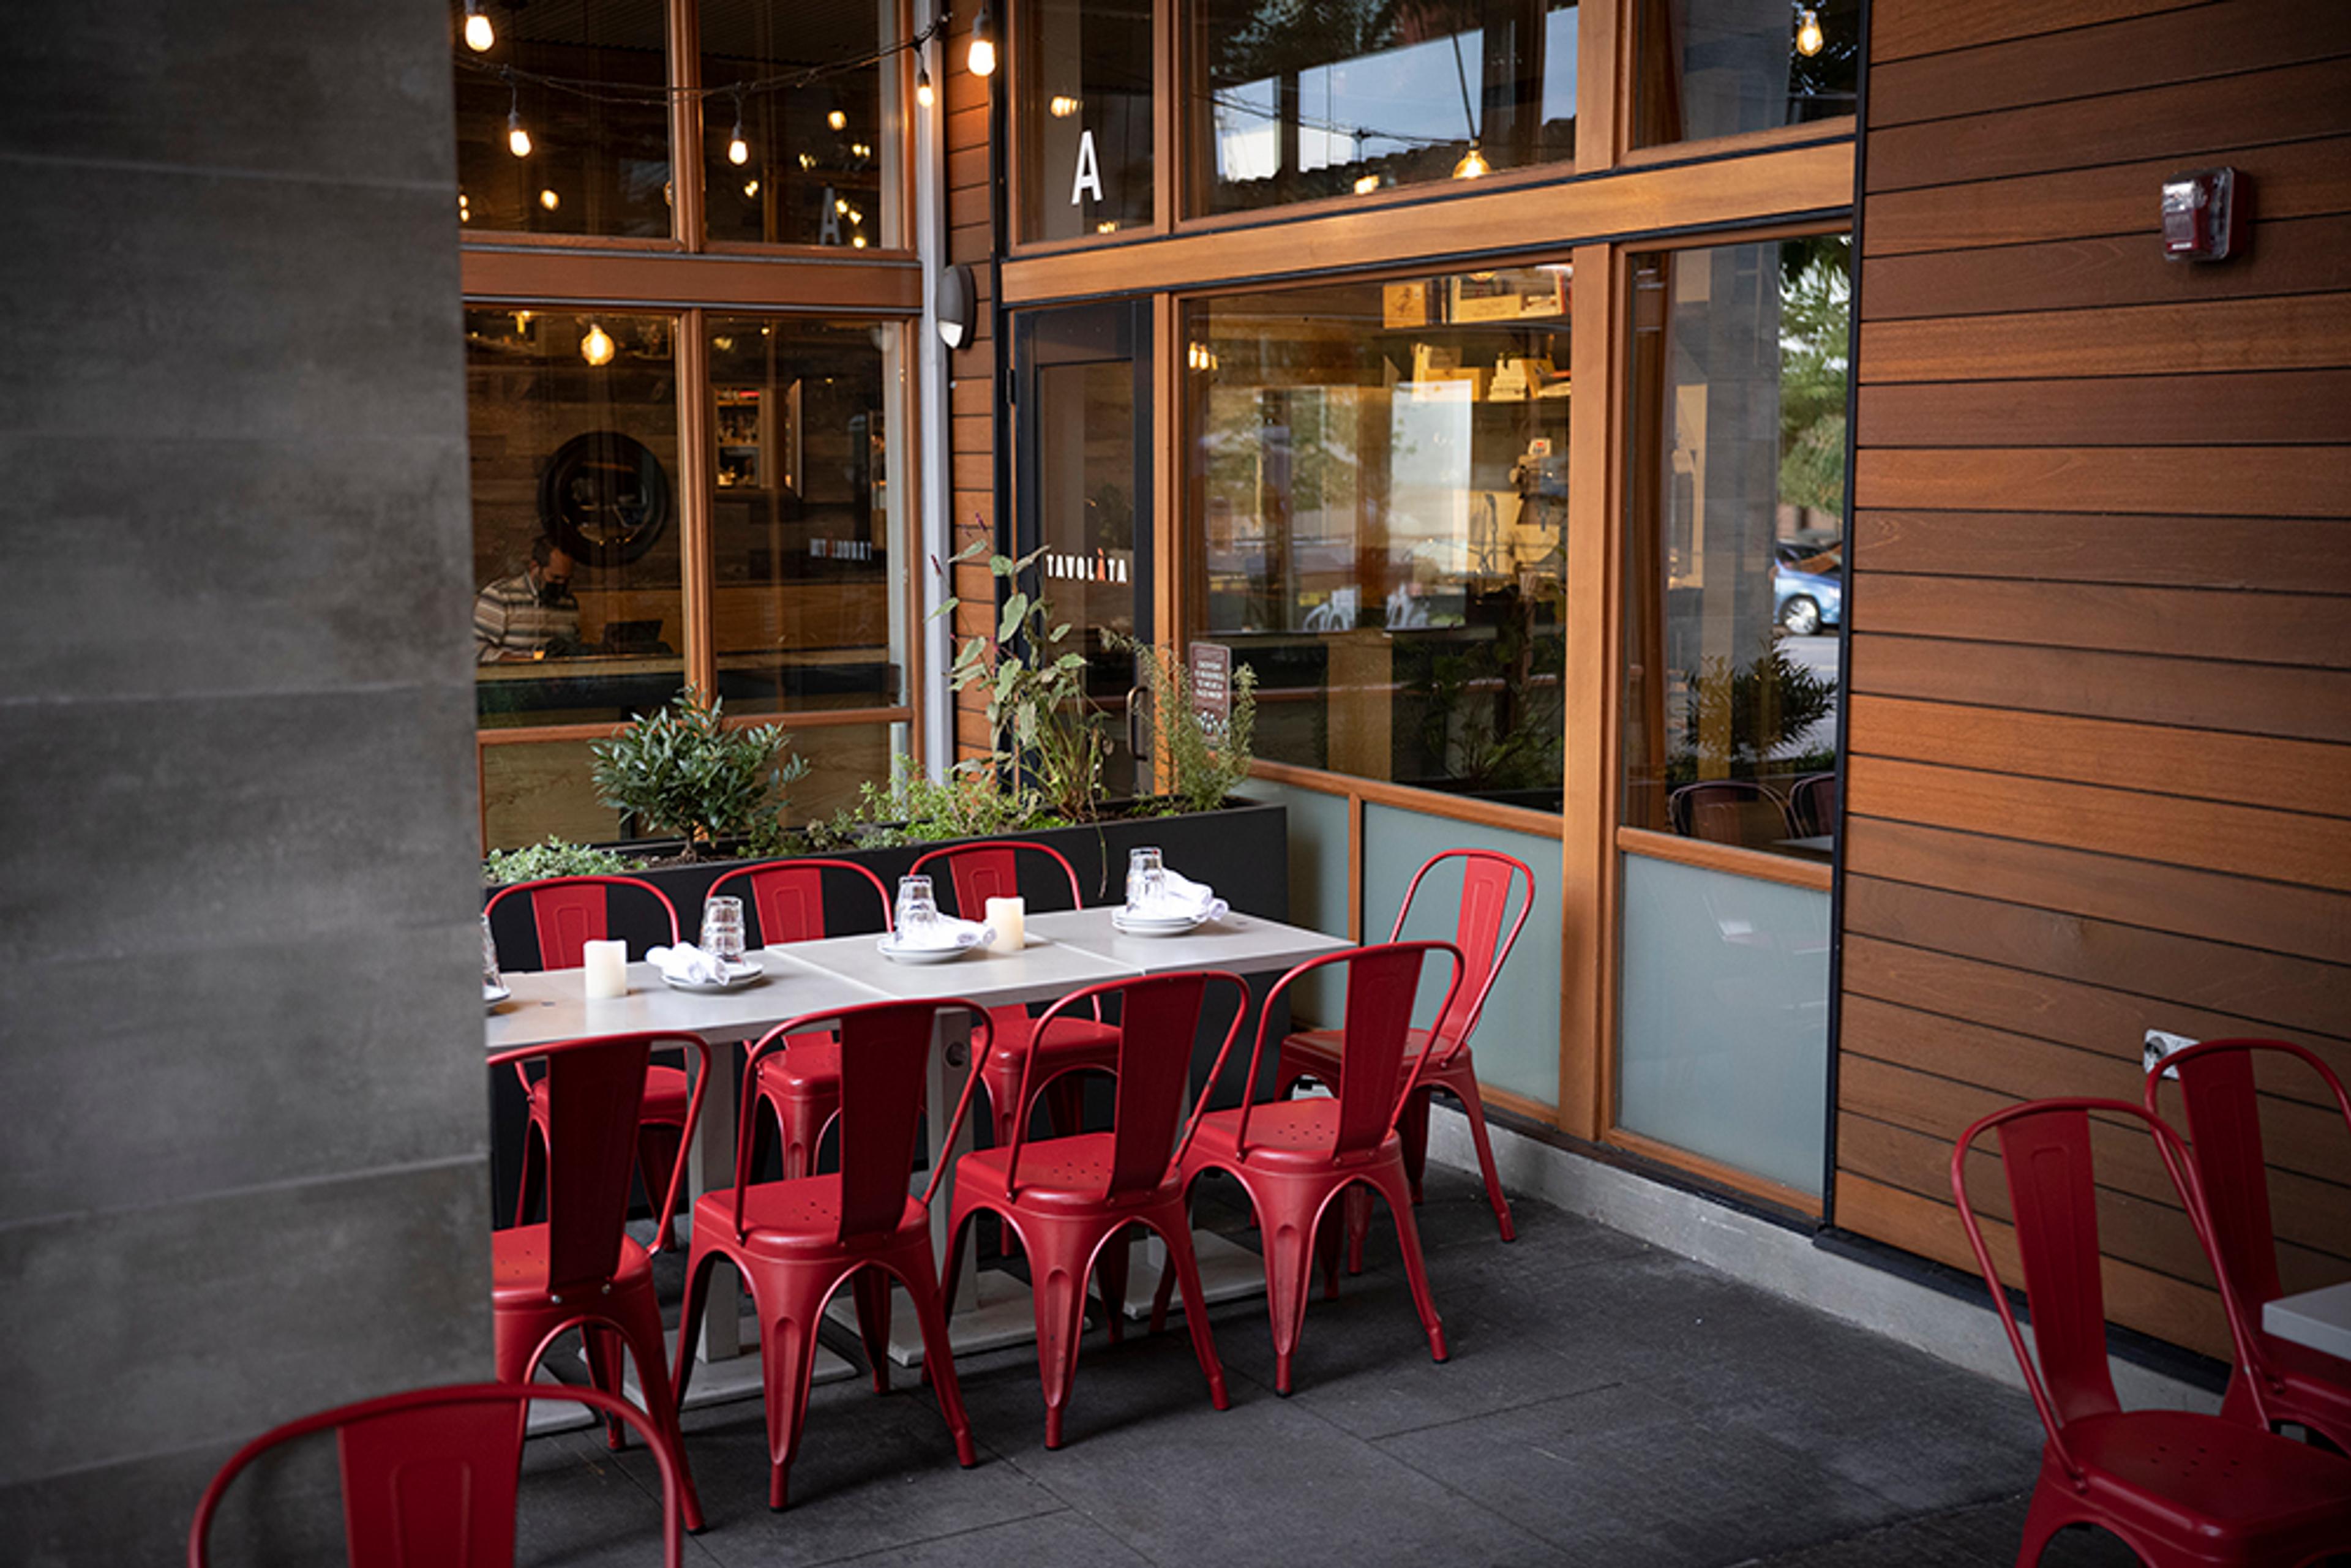 patio tables with wooded walls and red chars